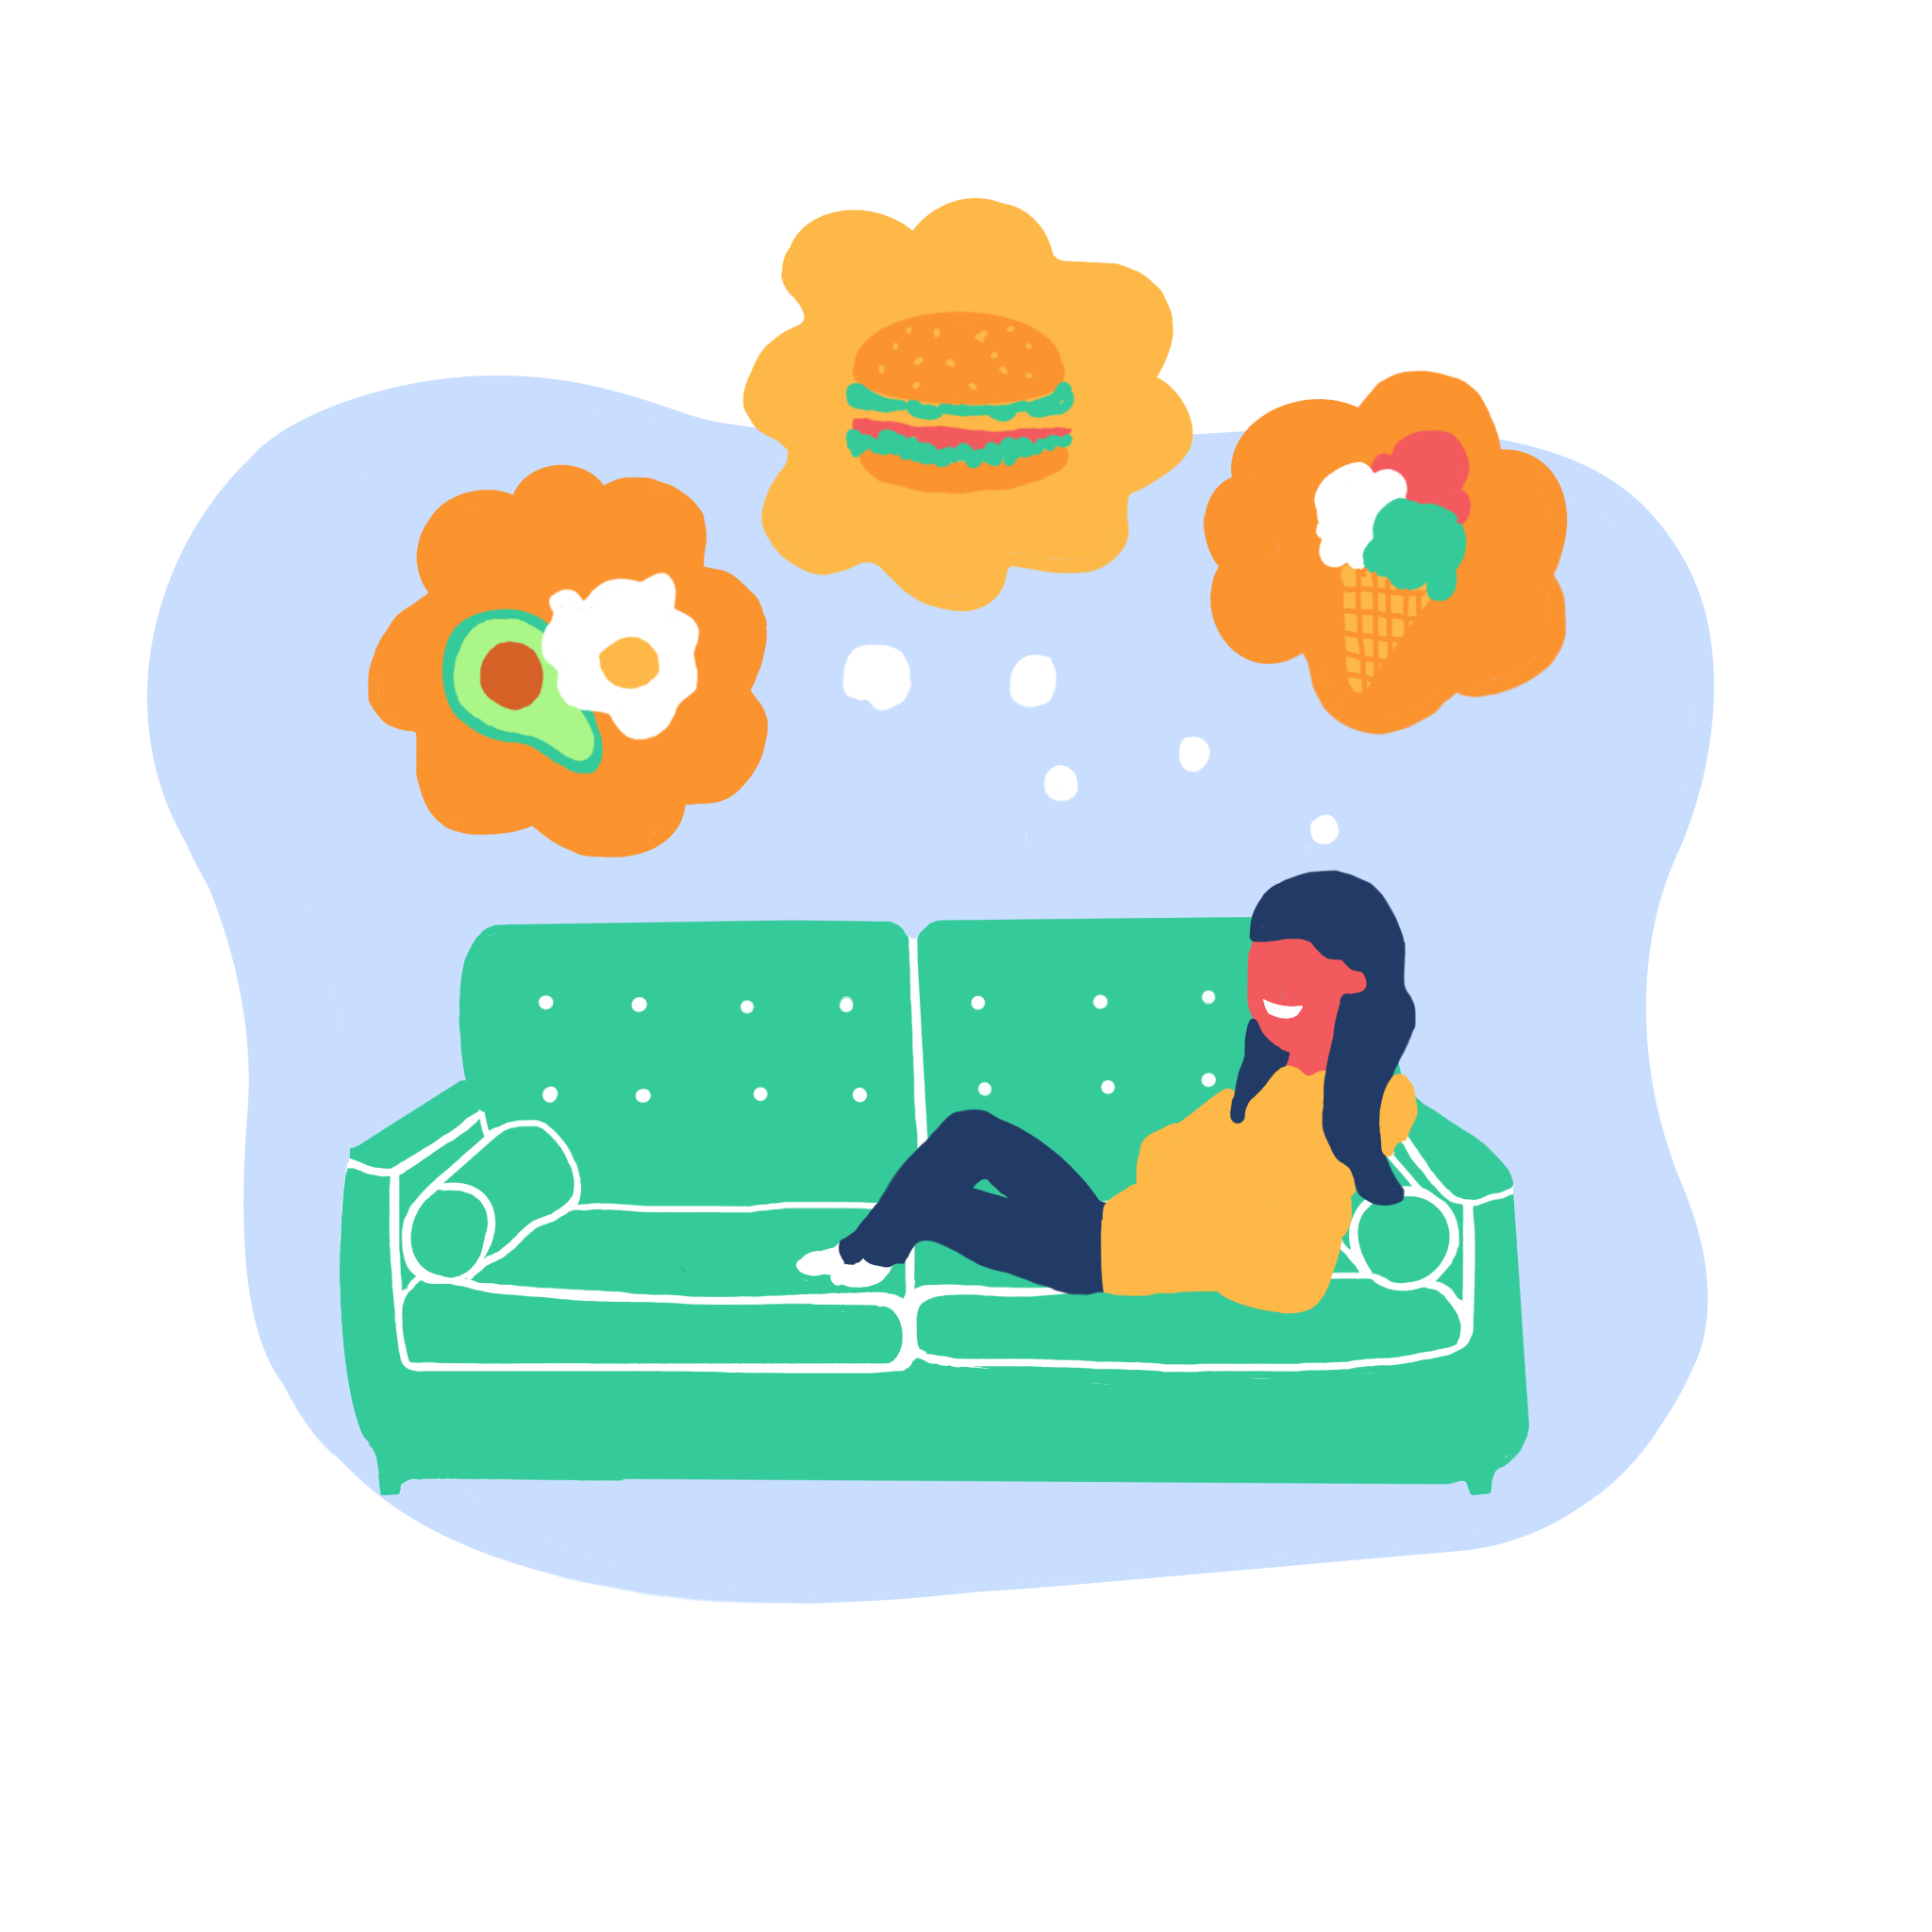 illustration of a person sitting on a couch day dreaming about food.